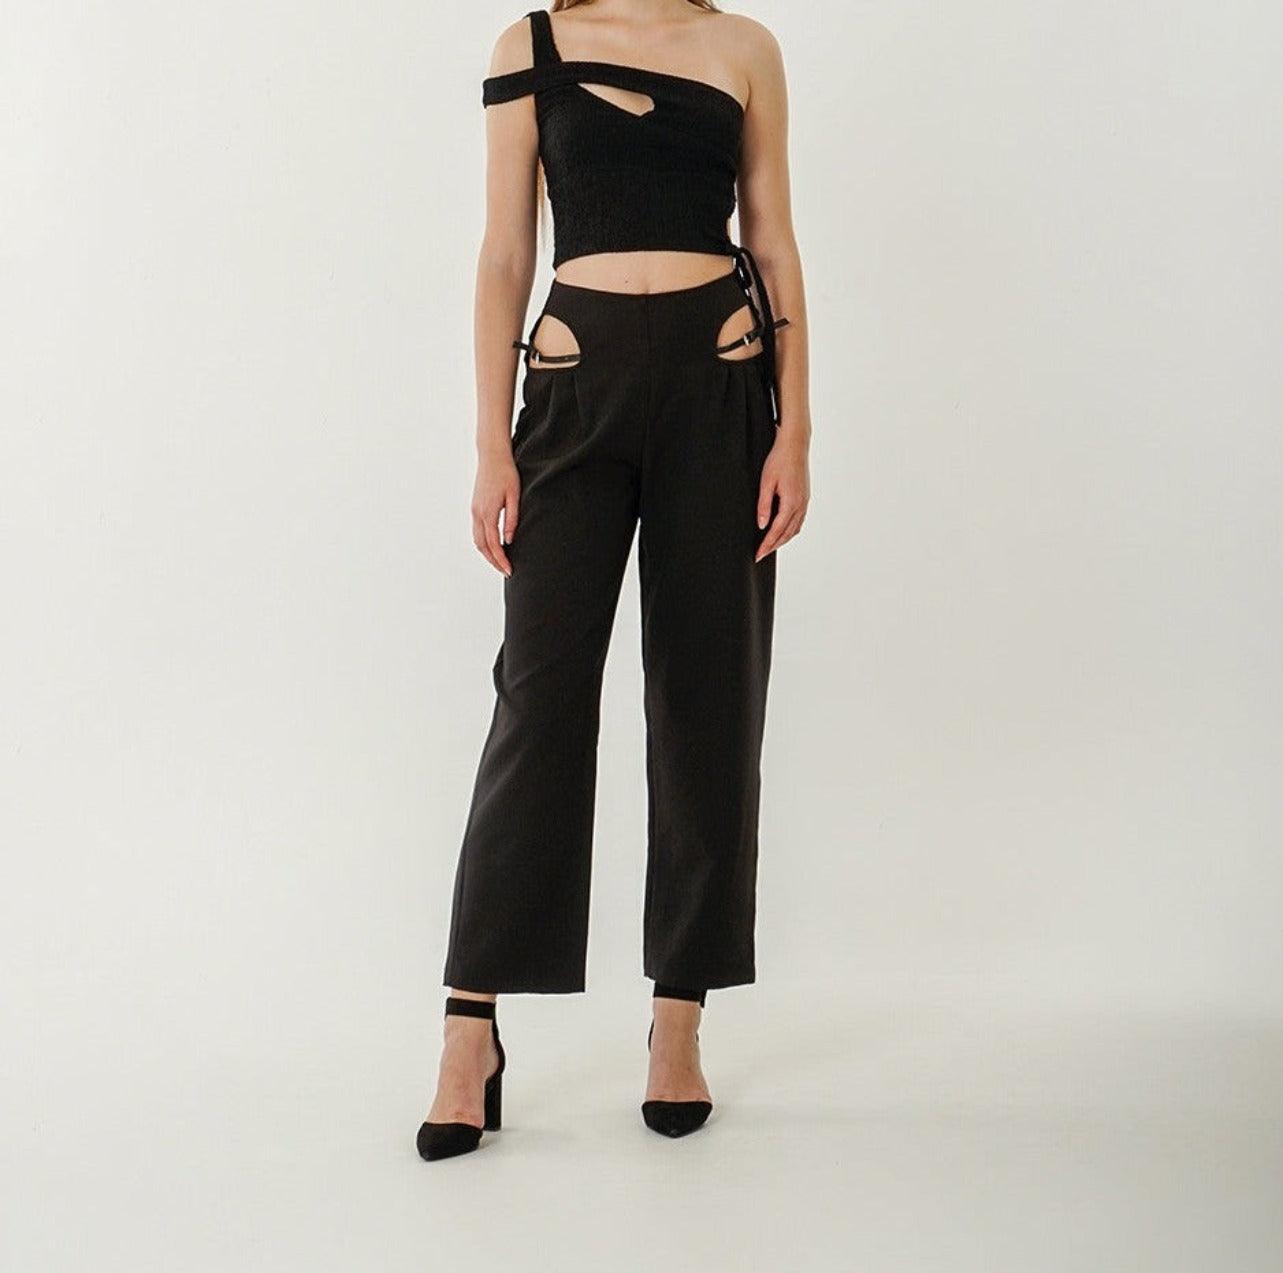 Kendall Cutout Trousers - Expat Life Style